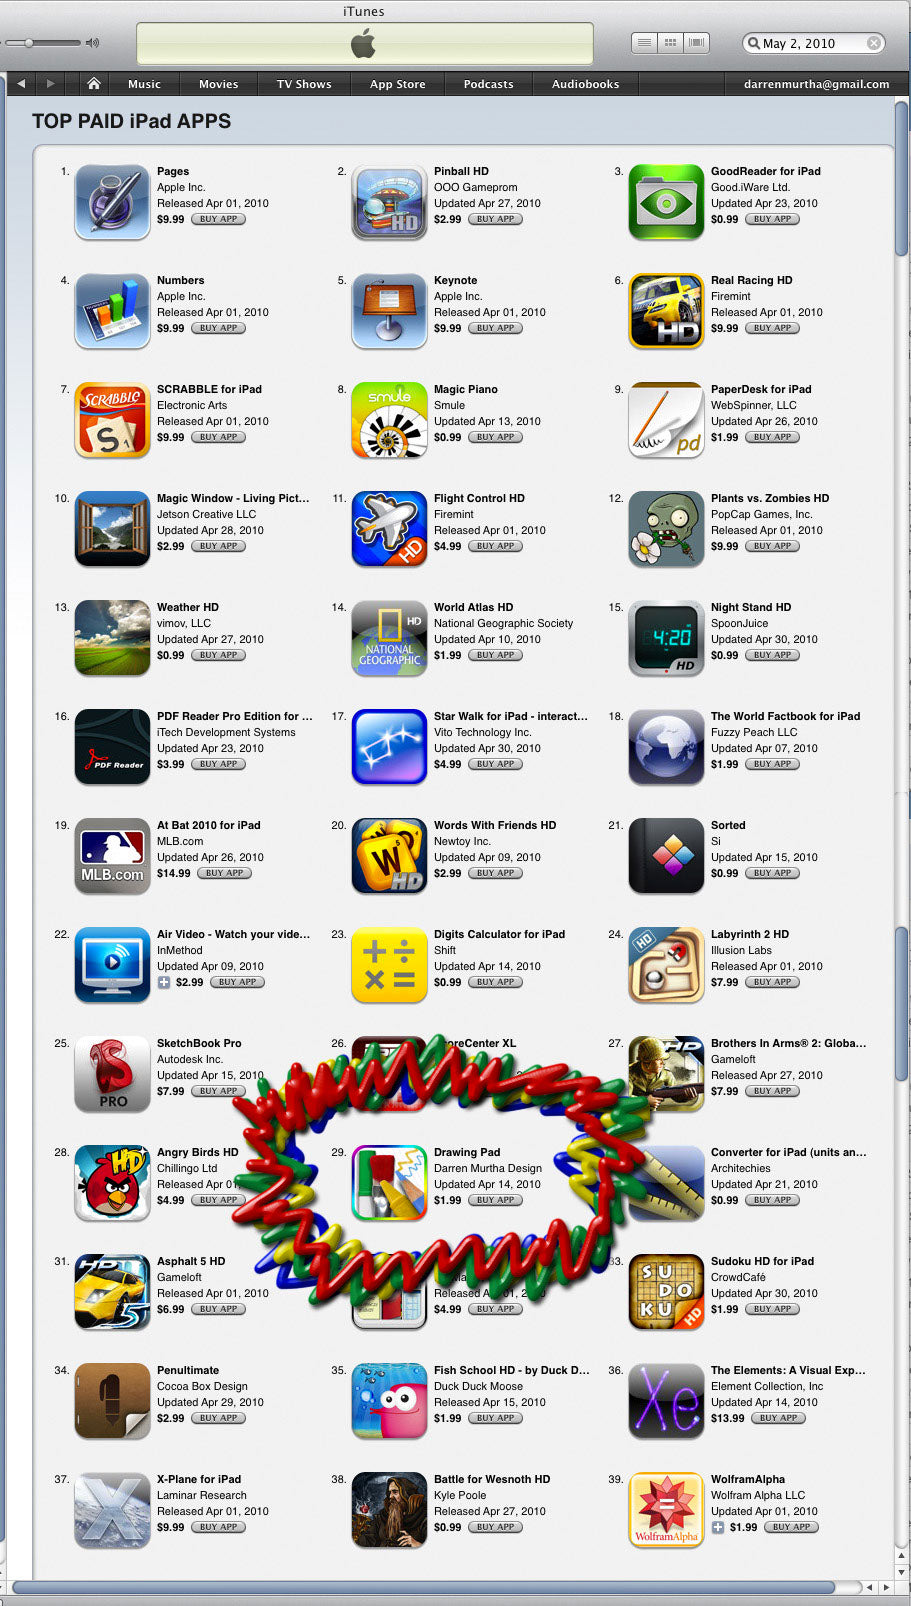 Drawing Pad in top 30 of all paid iPad Apps!